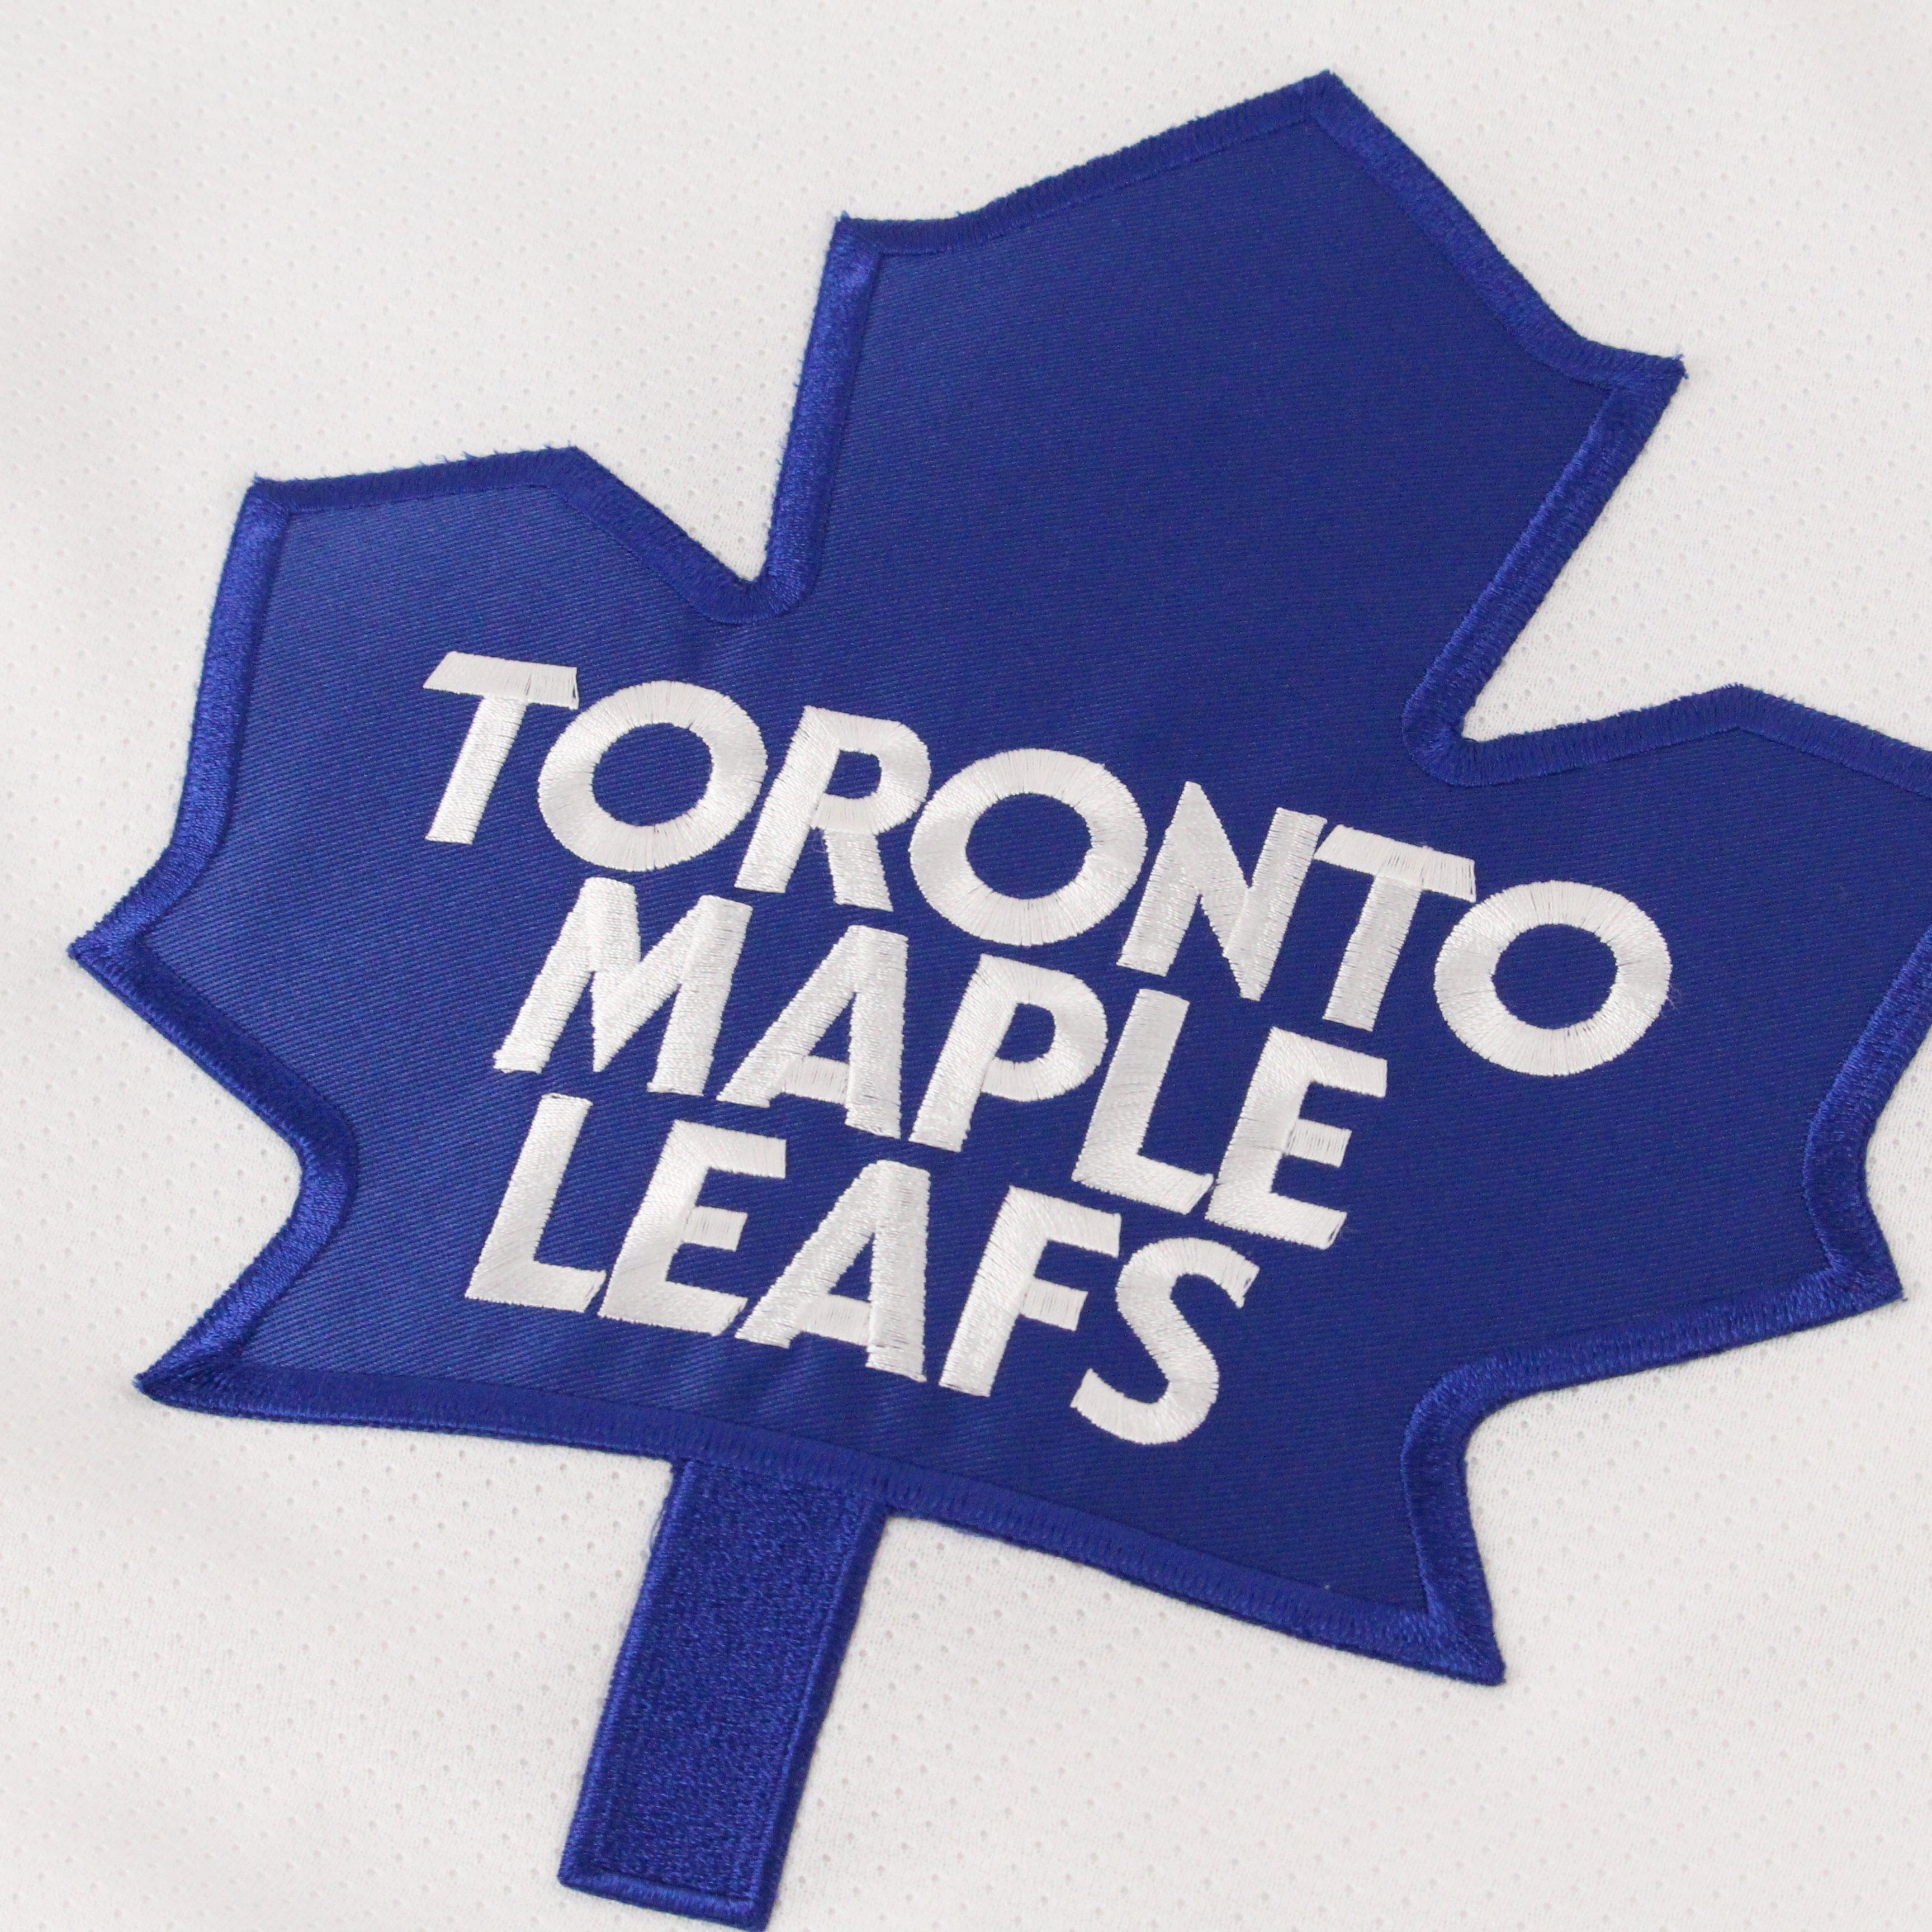 CCM Toronto Maple Leafs Hockey Jersey Youth Size L/XL NHL Unisex HAS STAINS